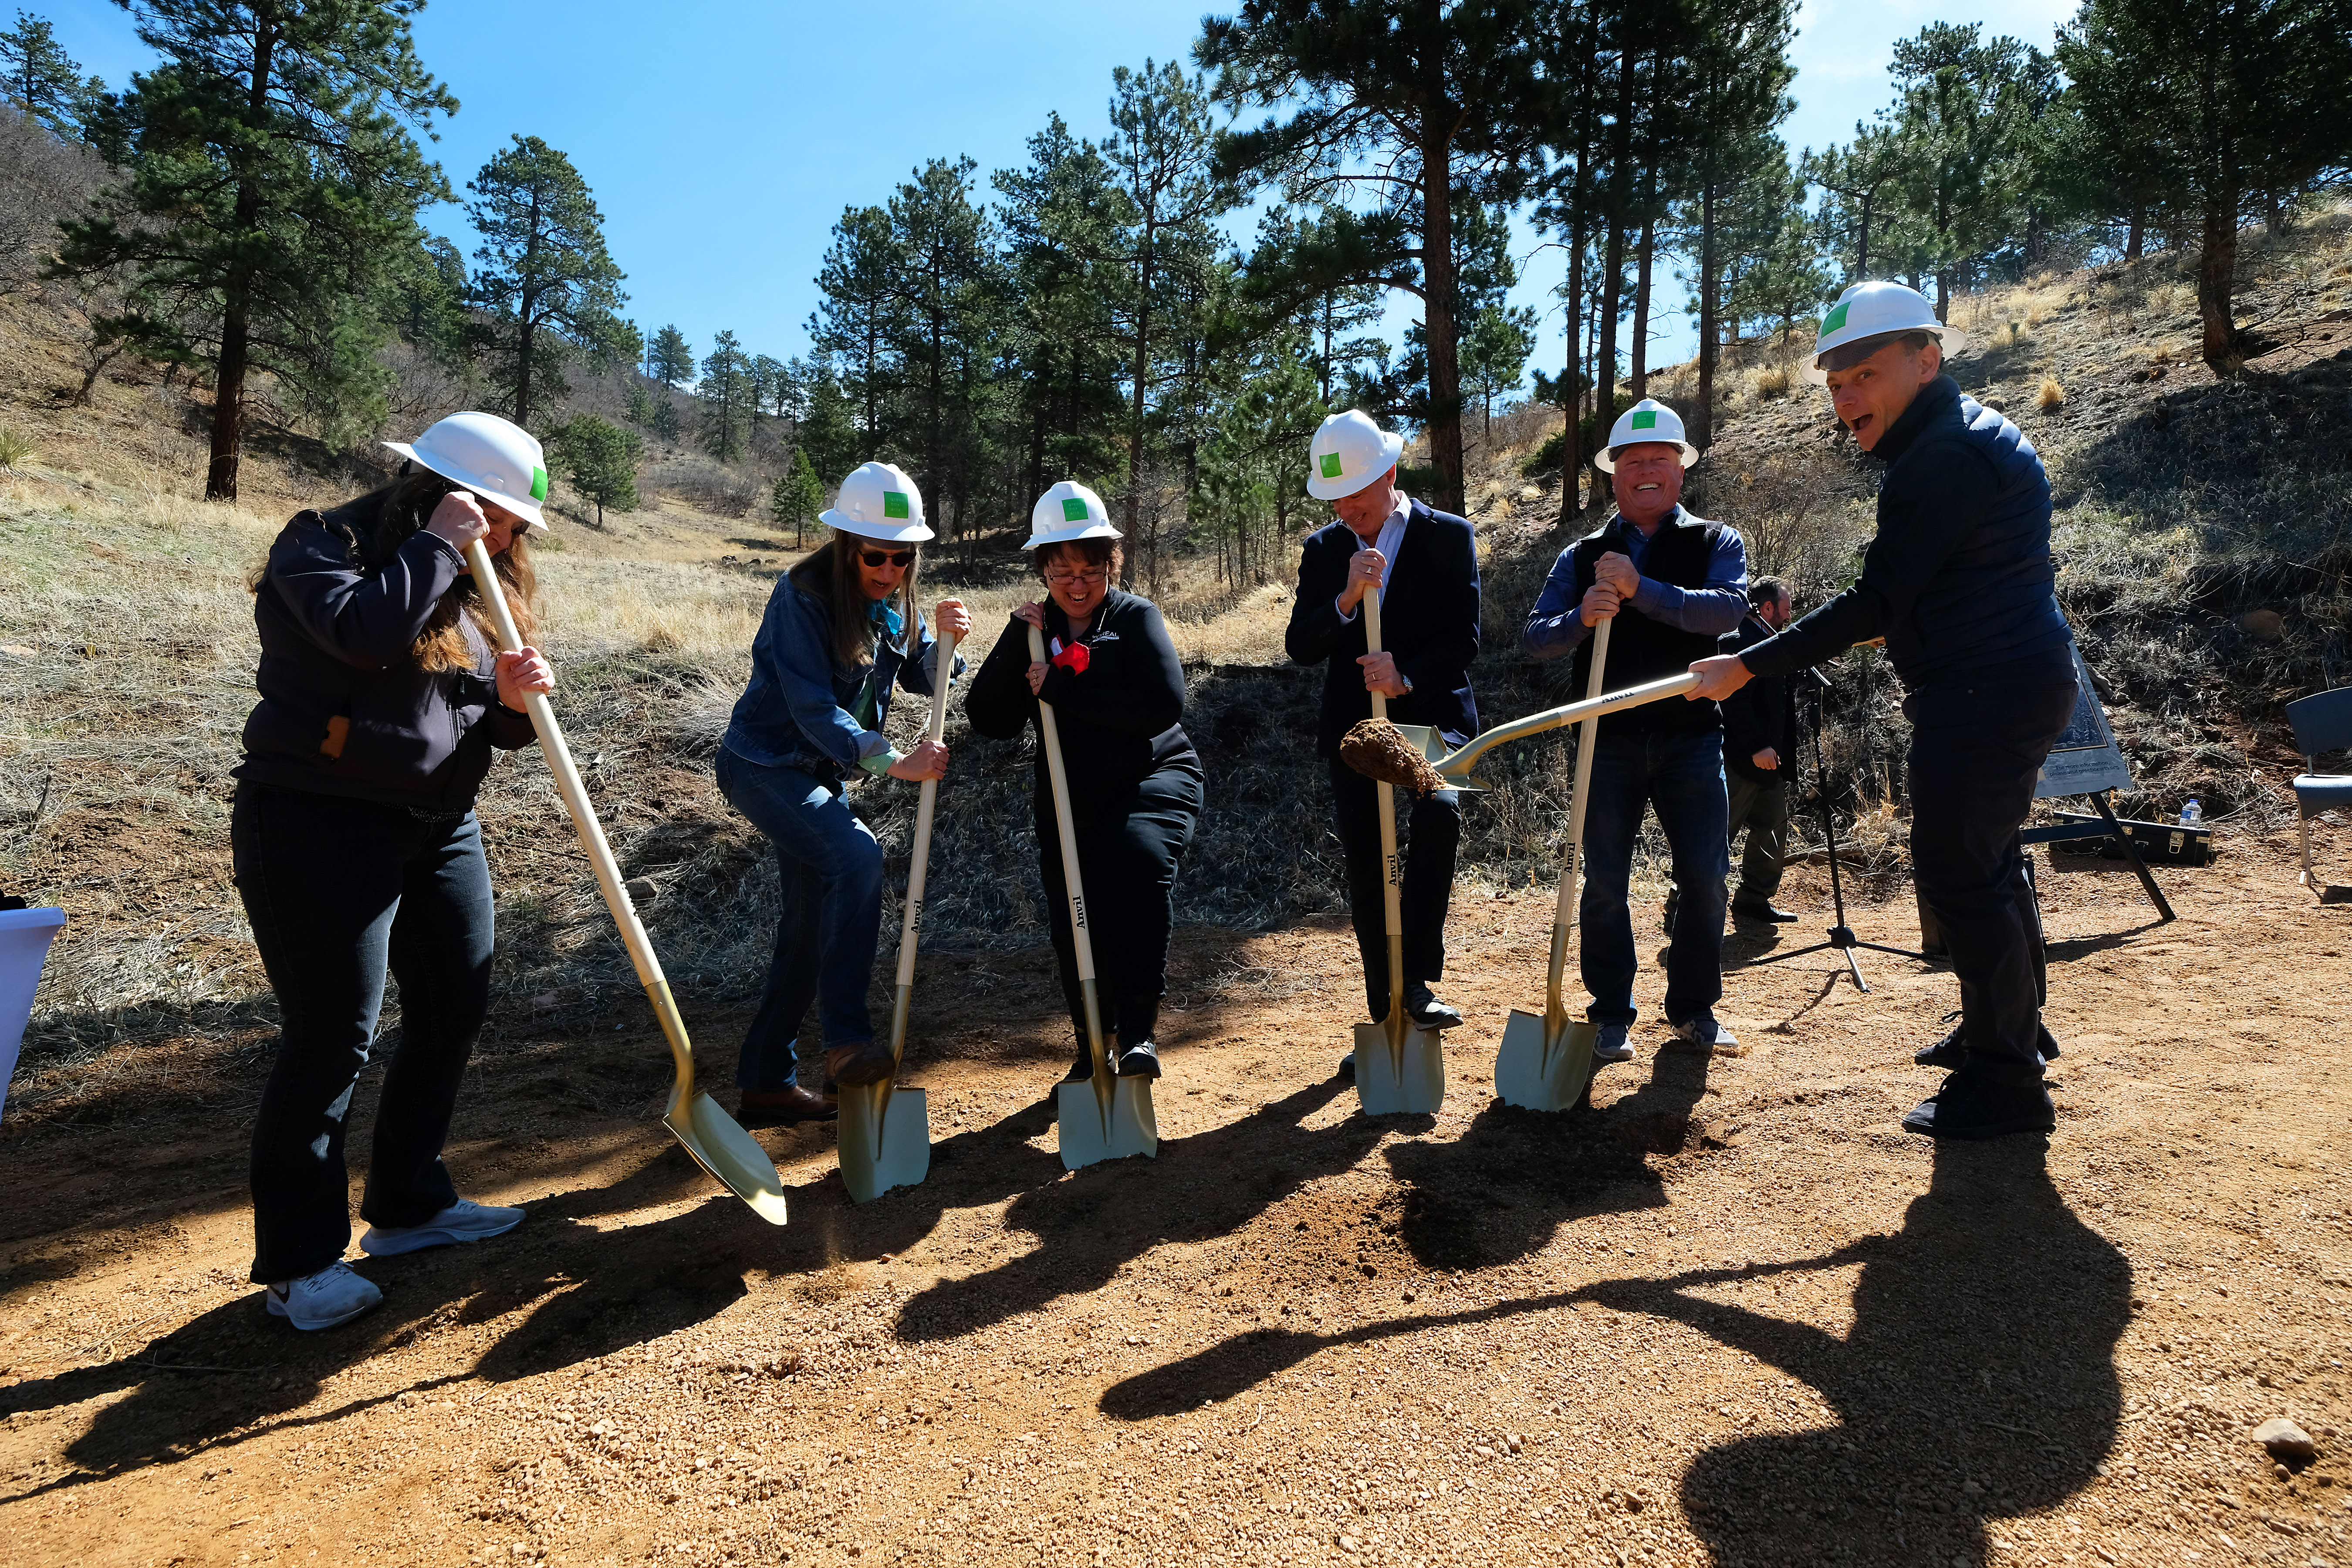 The first James Turrell Skyspace in Colorado broke ground Saturday in Green Mountain Falls, Colorado. Pictured from left to right: Mayor Jane Newberry; Town Council members Katherine Guthrie and Margaret Peterson; Green Box cofounder Christian Keesee; Skyspace Project Manager Jesse Stroope; Green Box cofounder Larry Keigwin. Photo by: Tom Kimmell Photography, Colorado Springs.